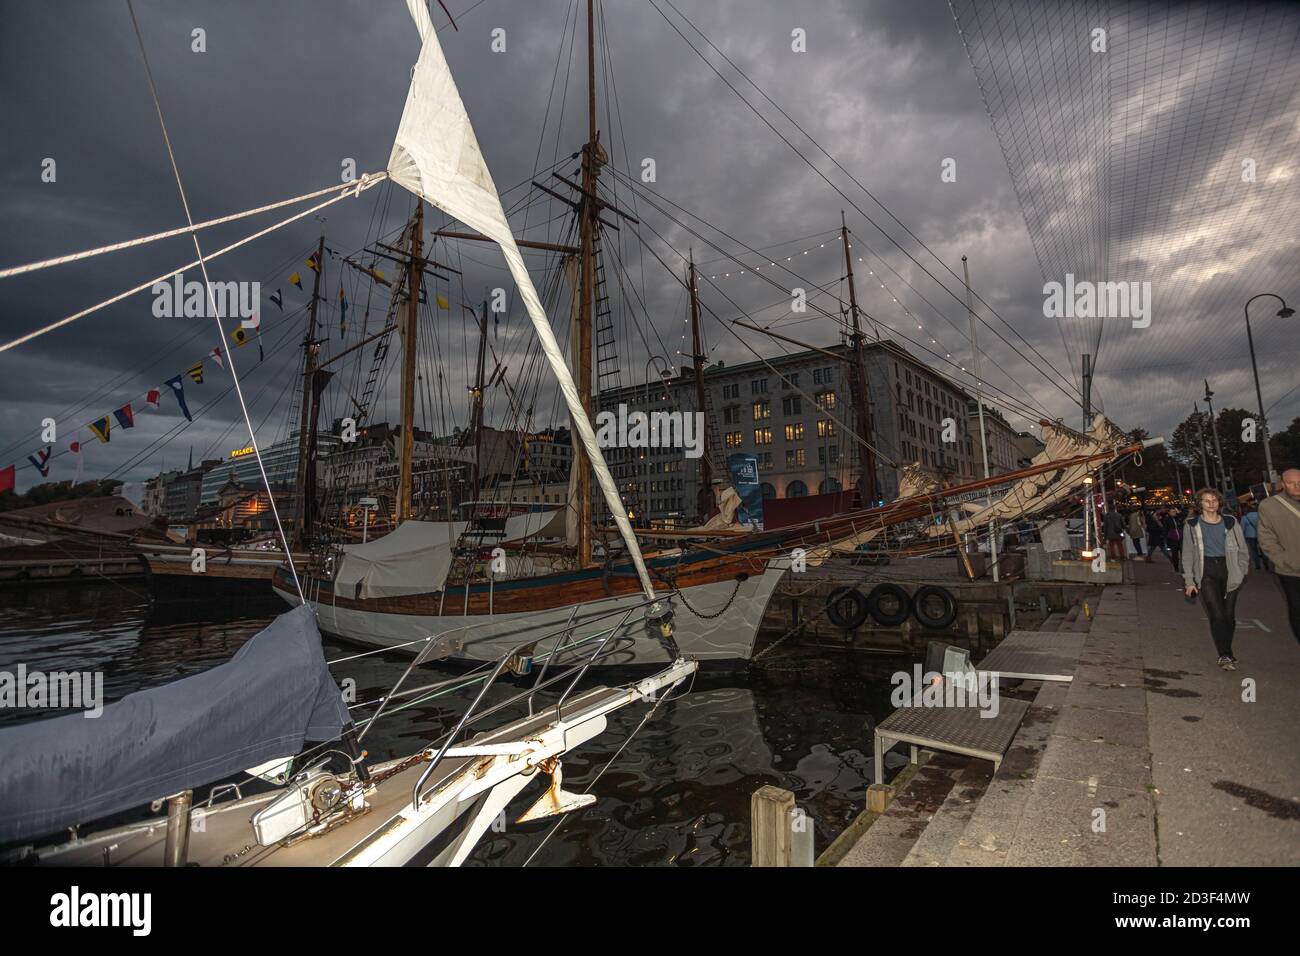 Helsinki, Uusimaa, Finland October 7, 2020 Moored boats and yachts at the Market Square to take part in the traditional delicatessen fair. Evening time. High quality photo Stock Photo